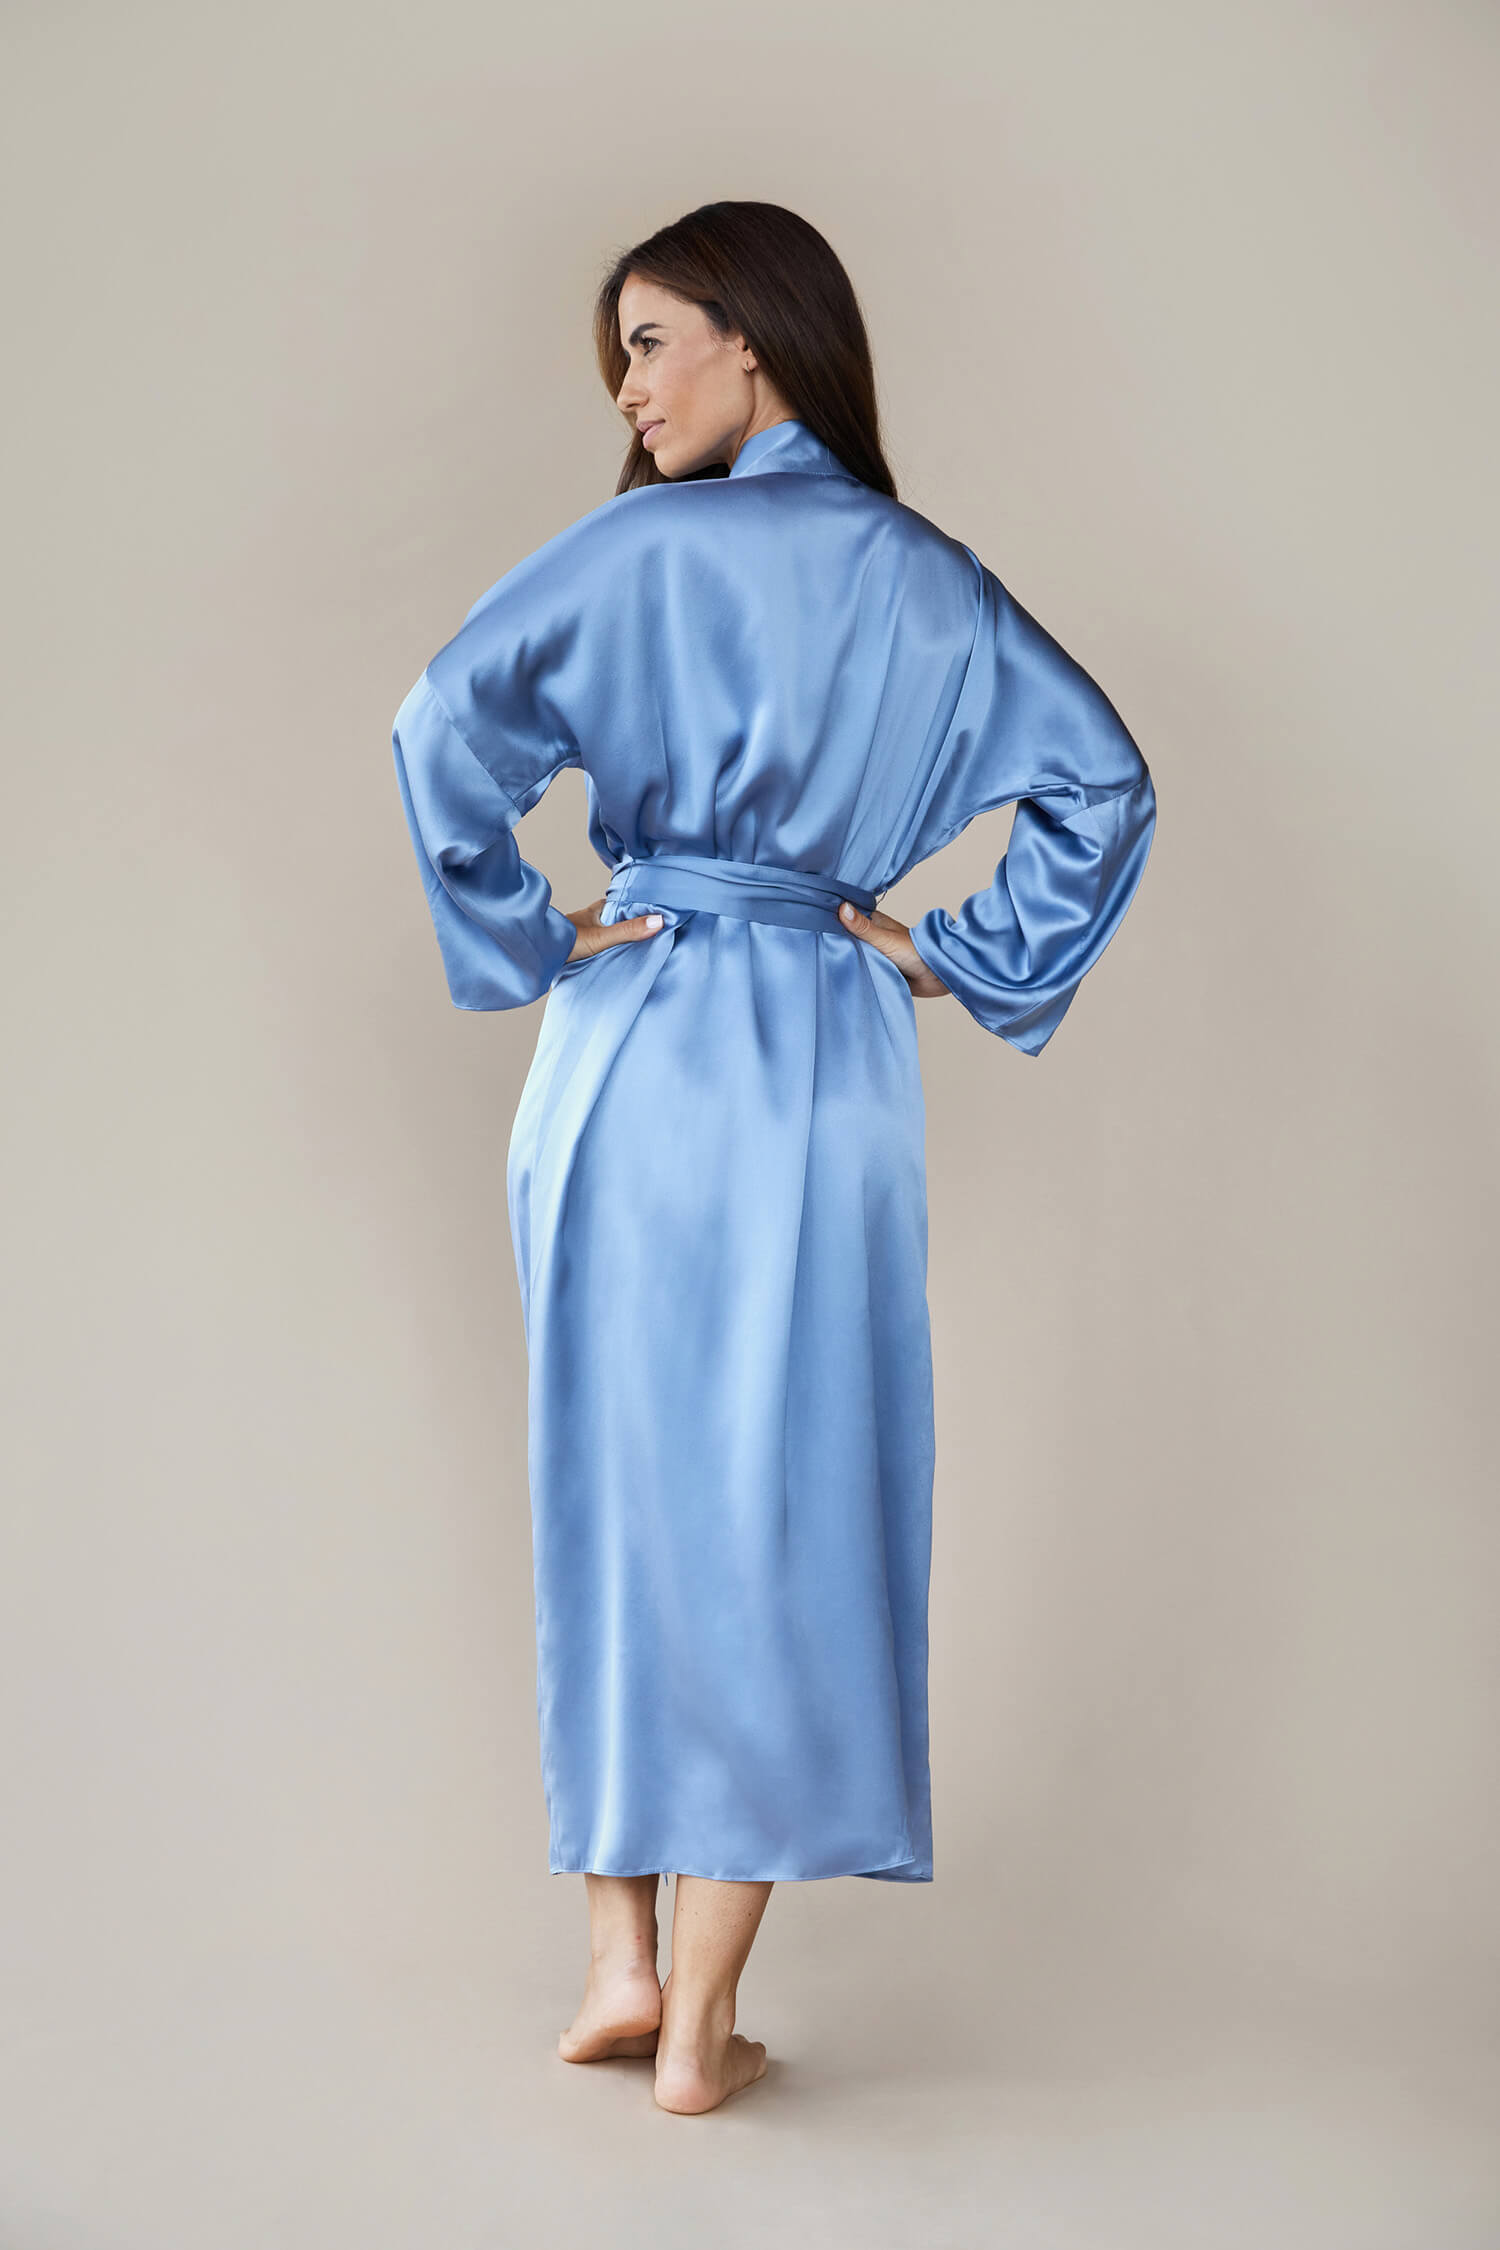 Model shot from the back wearing a  kimono style luxury silk robe In blue tied at the waist. She looks to the side with her hands on her waist elegantly